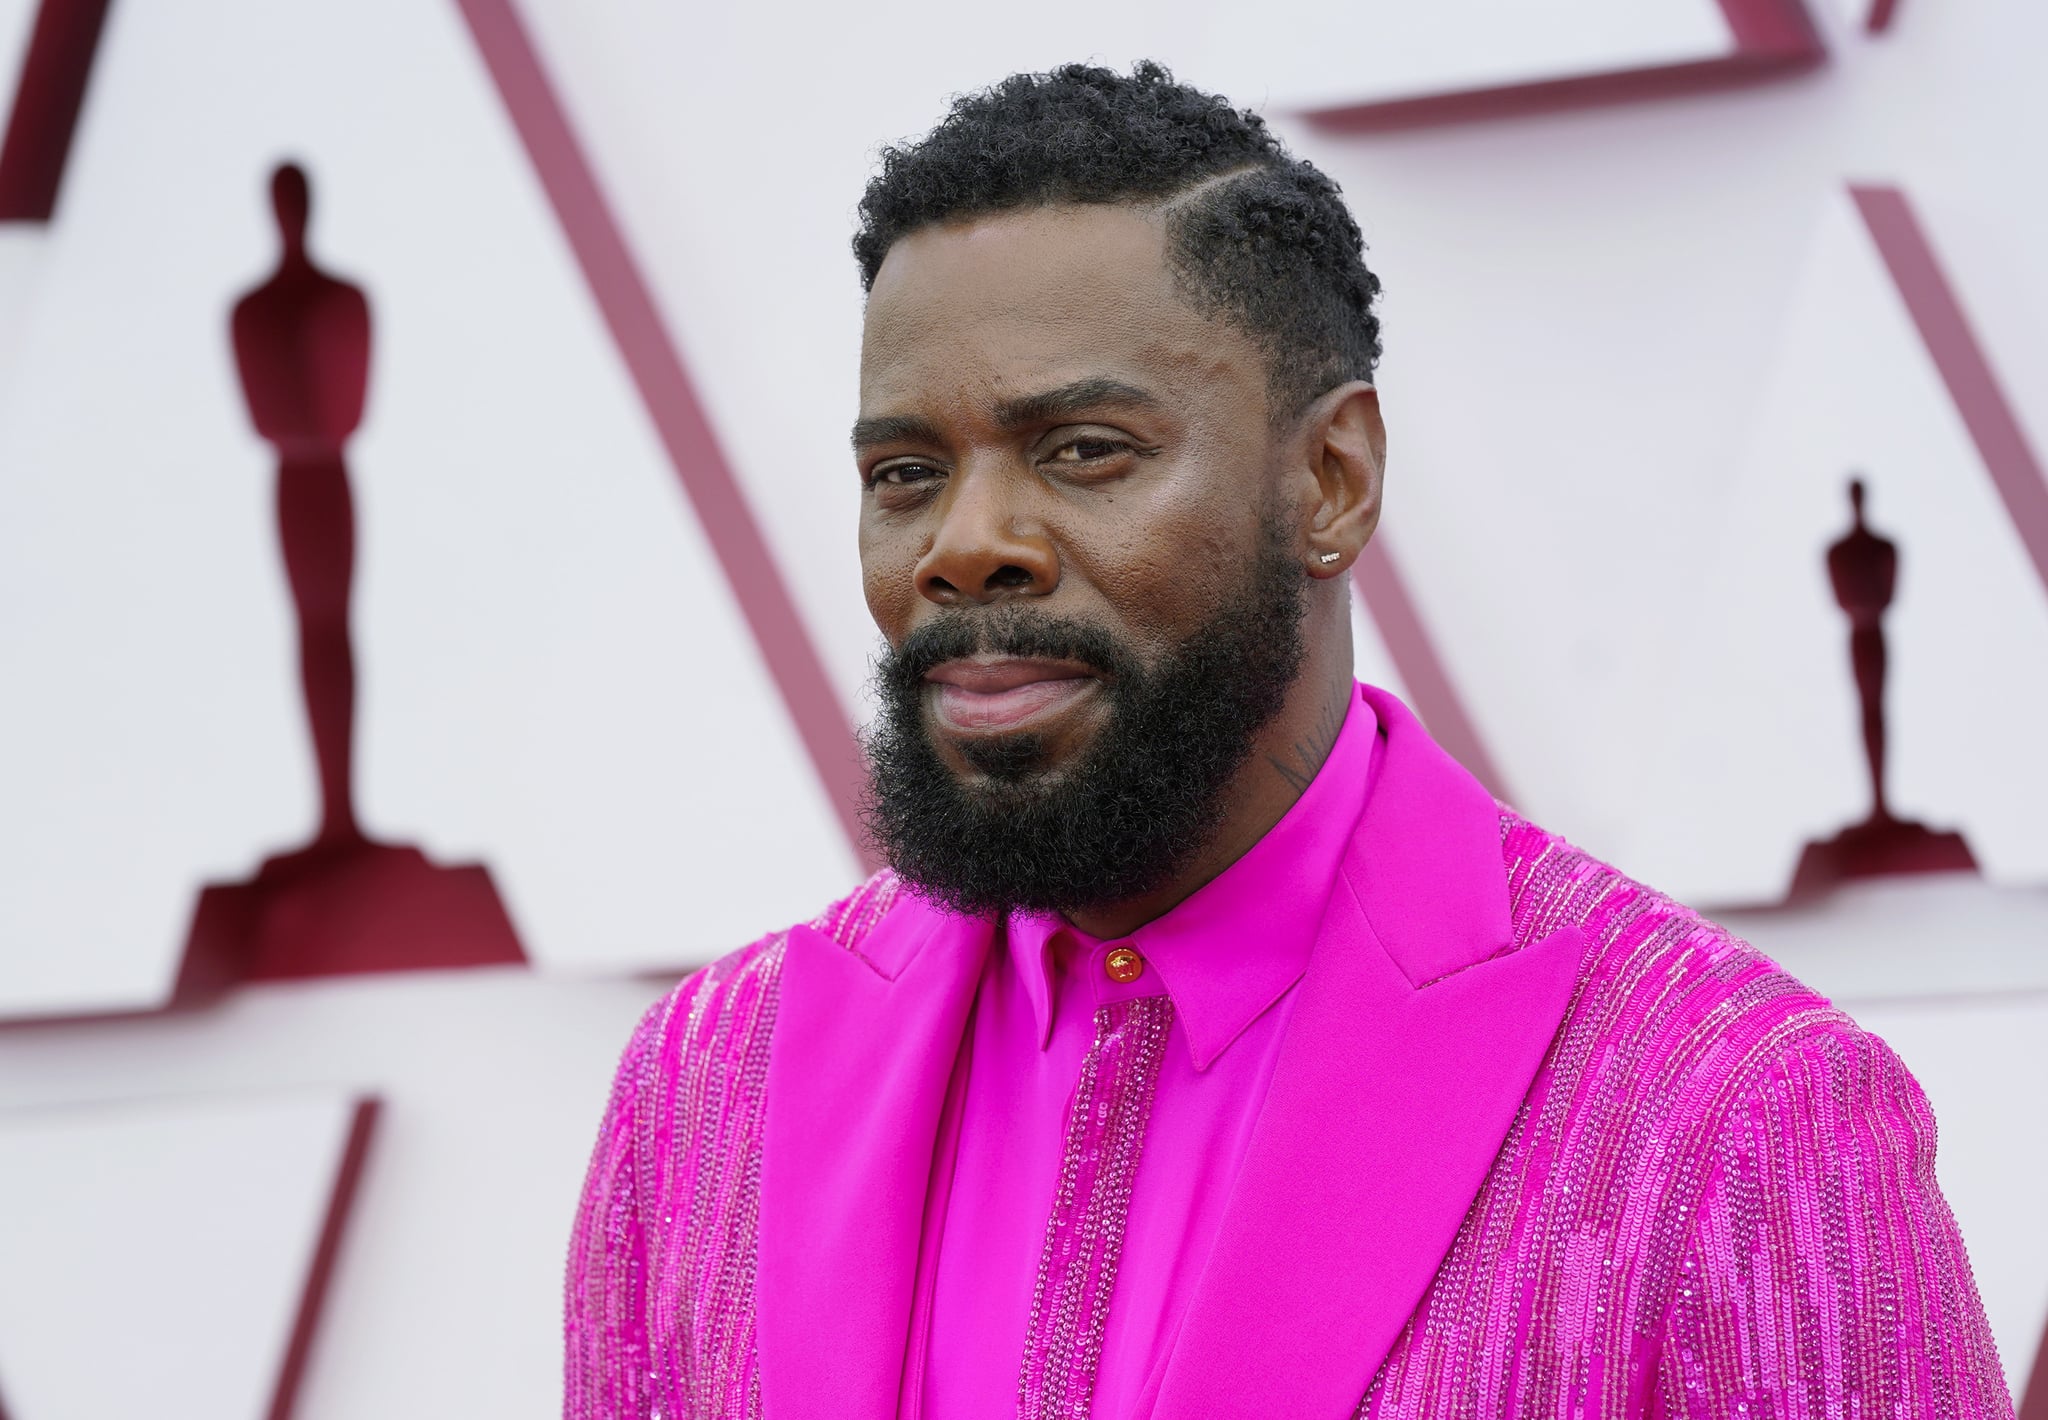 LOS ANGELES, CALIFORNIA – APRIL 25: Colman Domingo attends the 93rd Annual Academy Awards at Union Station on April 25, 2021 in Los Angeles, California. (Photo by Chris Pizzello-Pool/Getty Images)